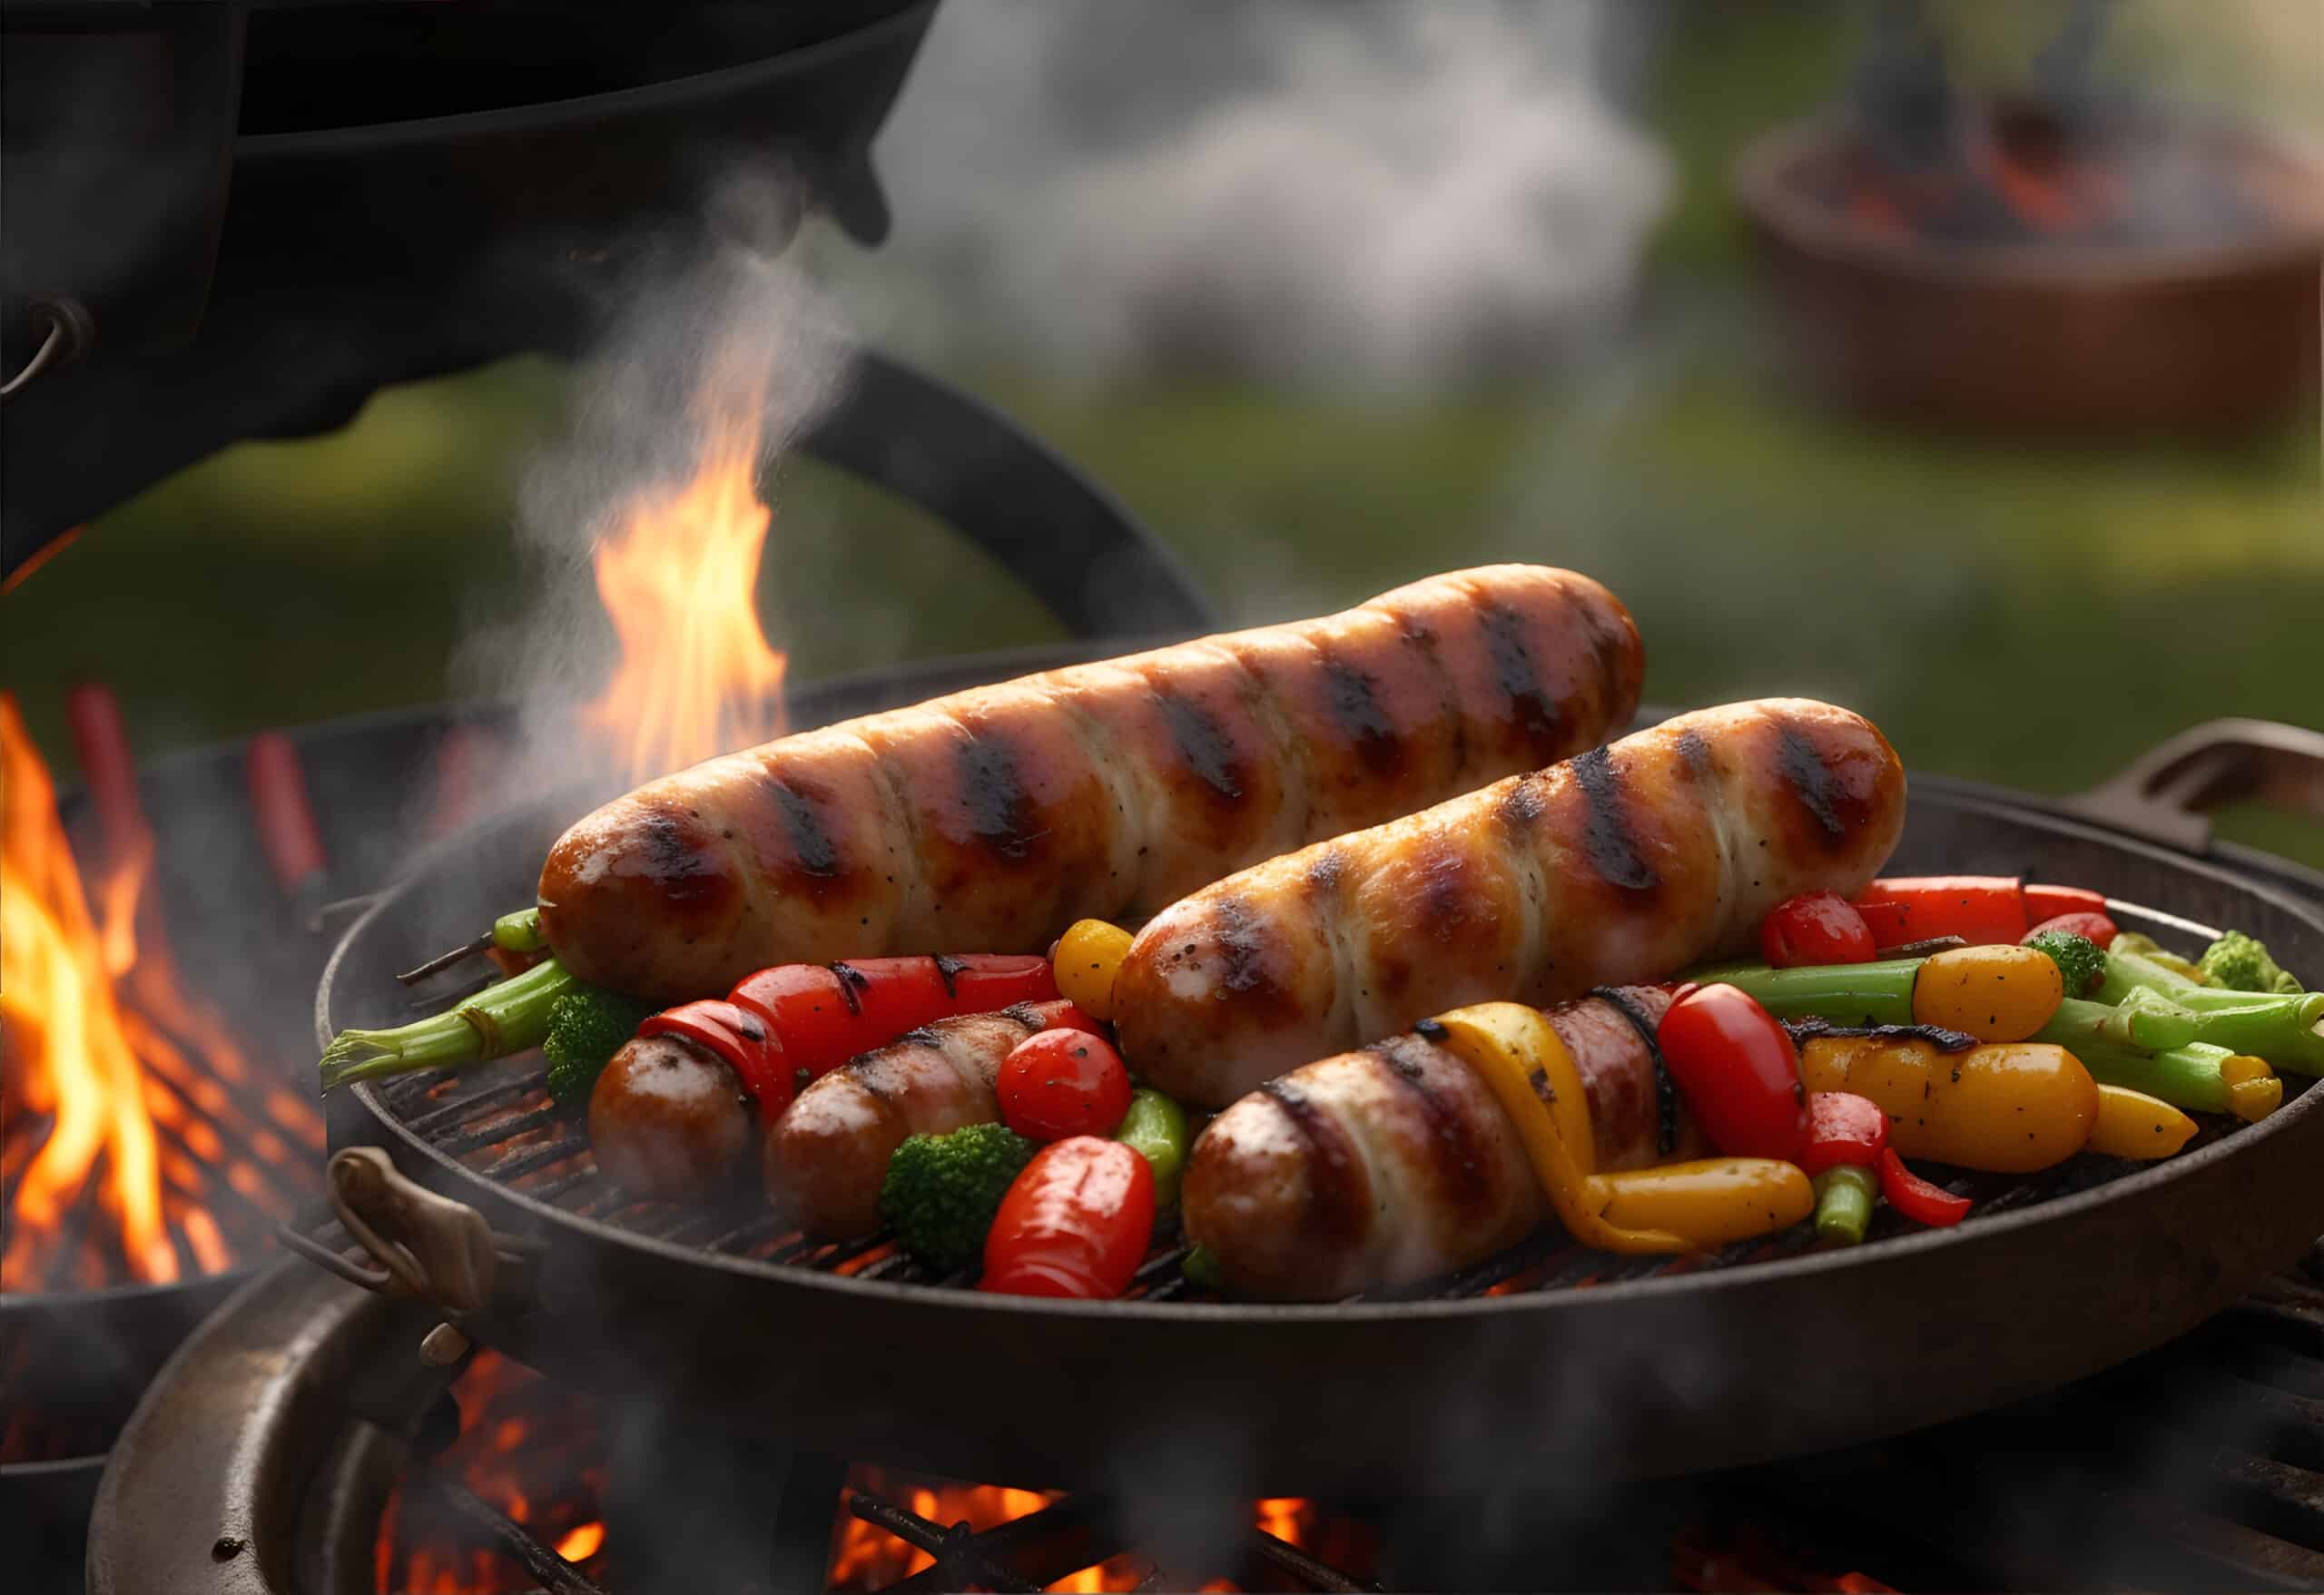 www.appr.com : How Long To Grill Sausage On Gas Grill?